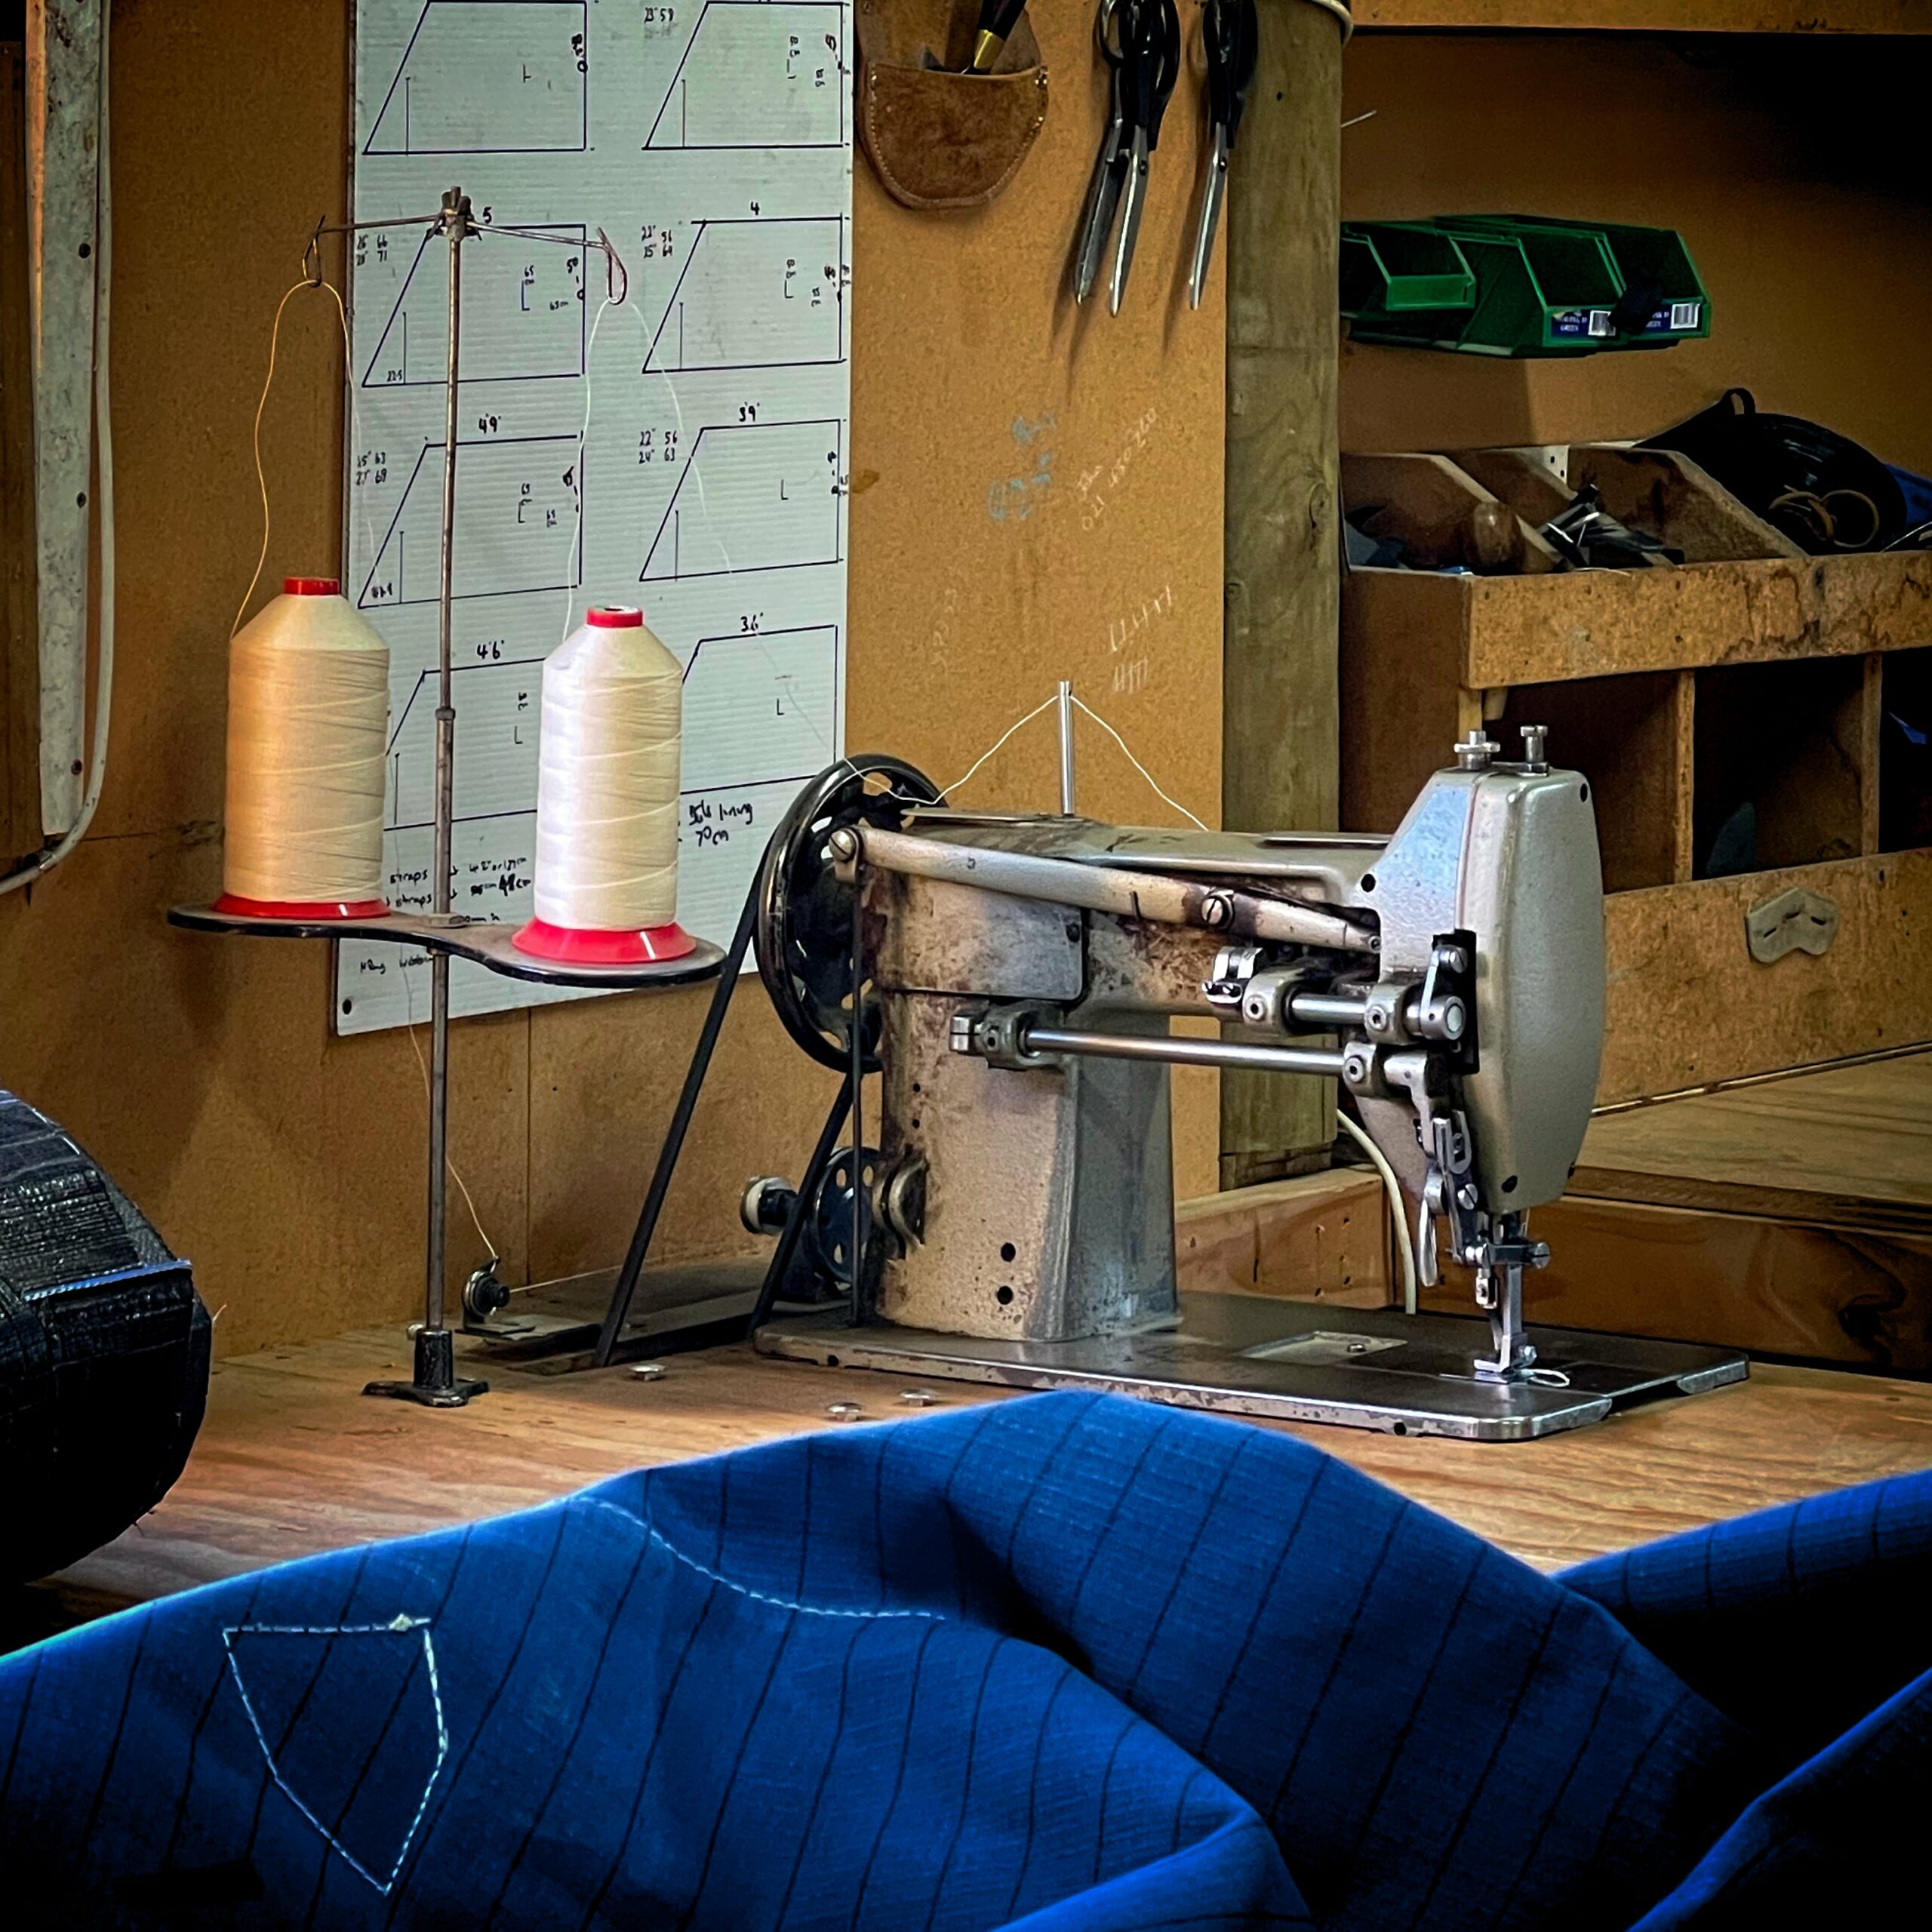 Canvas product and sewing machine in workshop